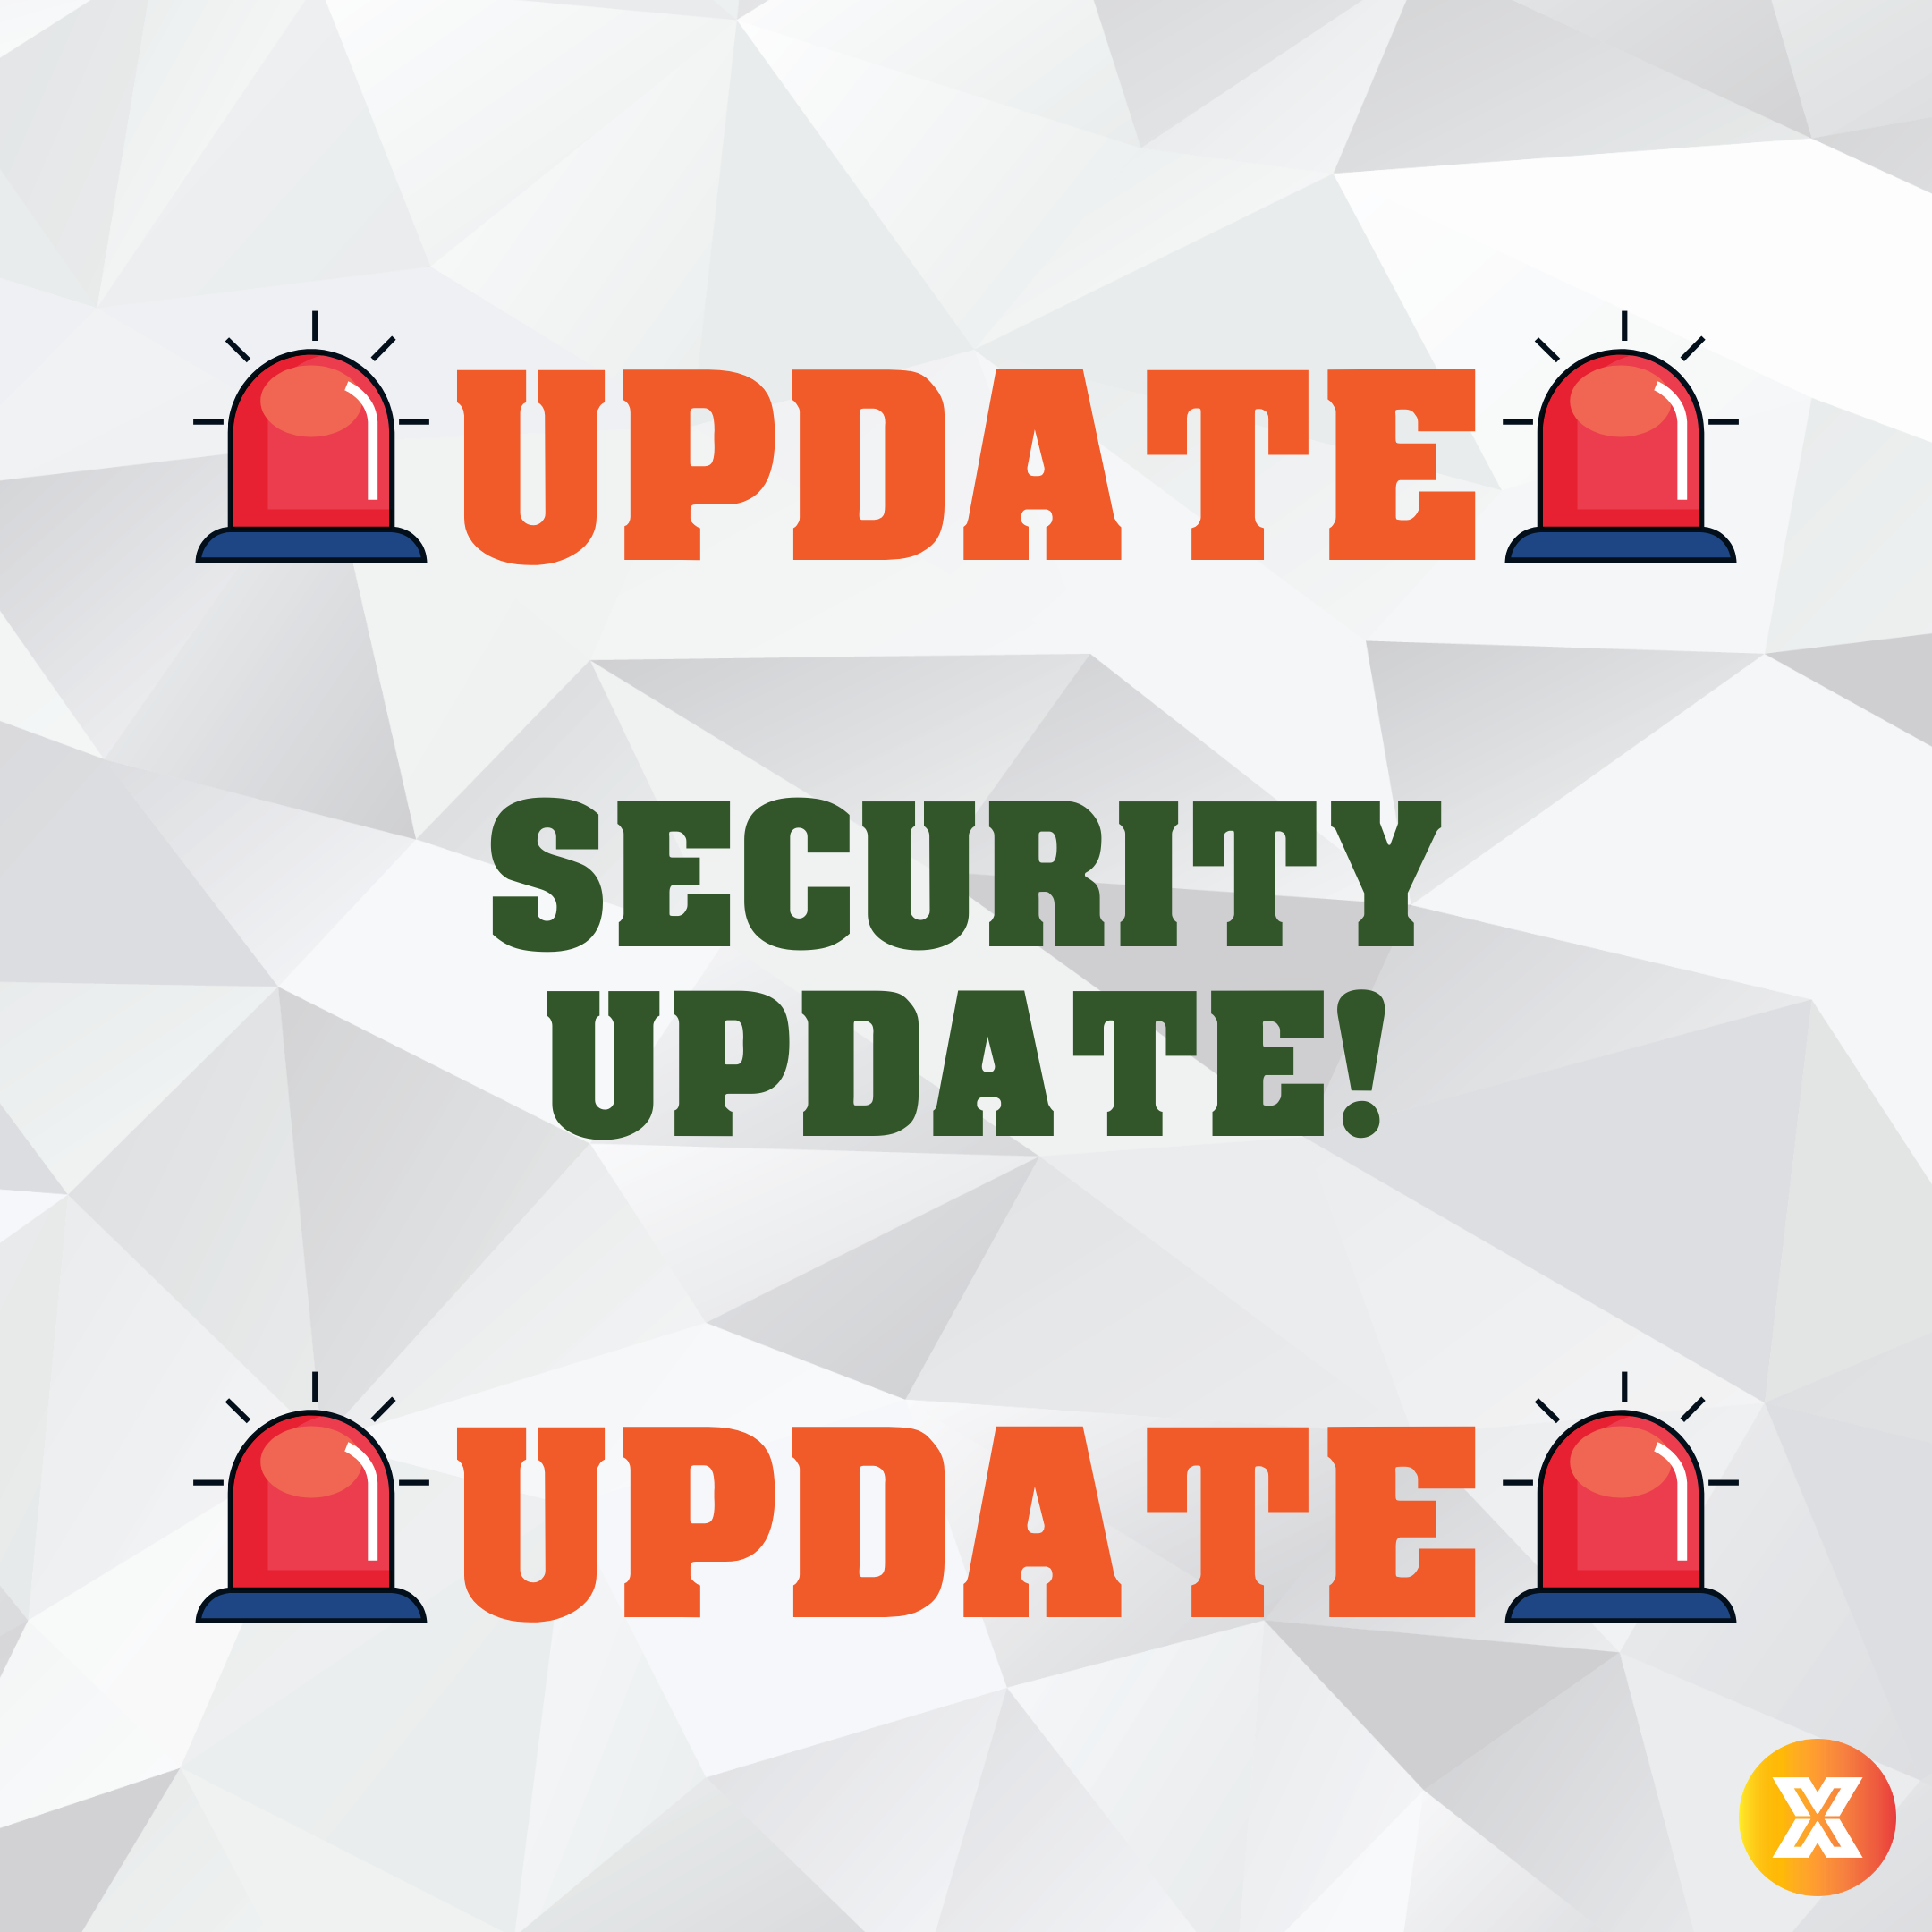 SECURITY UPDATE! | MARCH 12, 2022